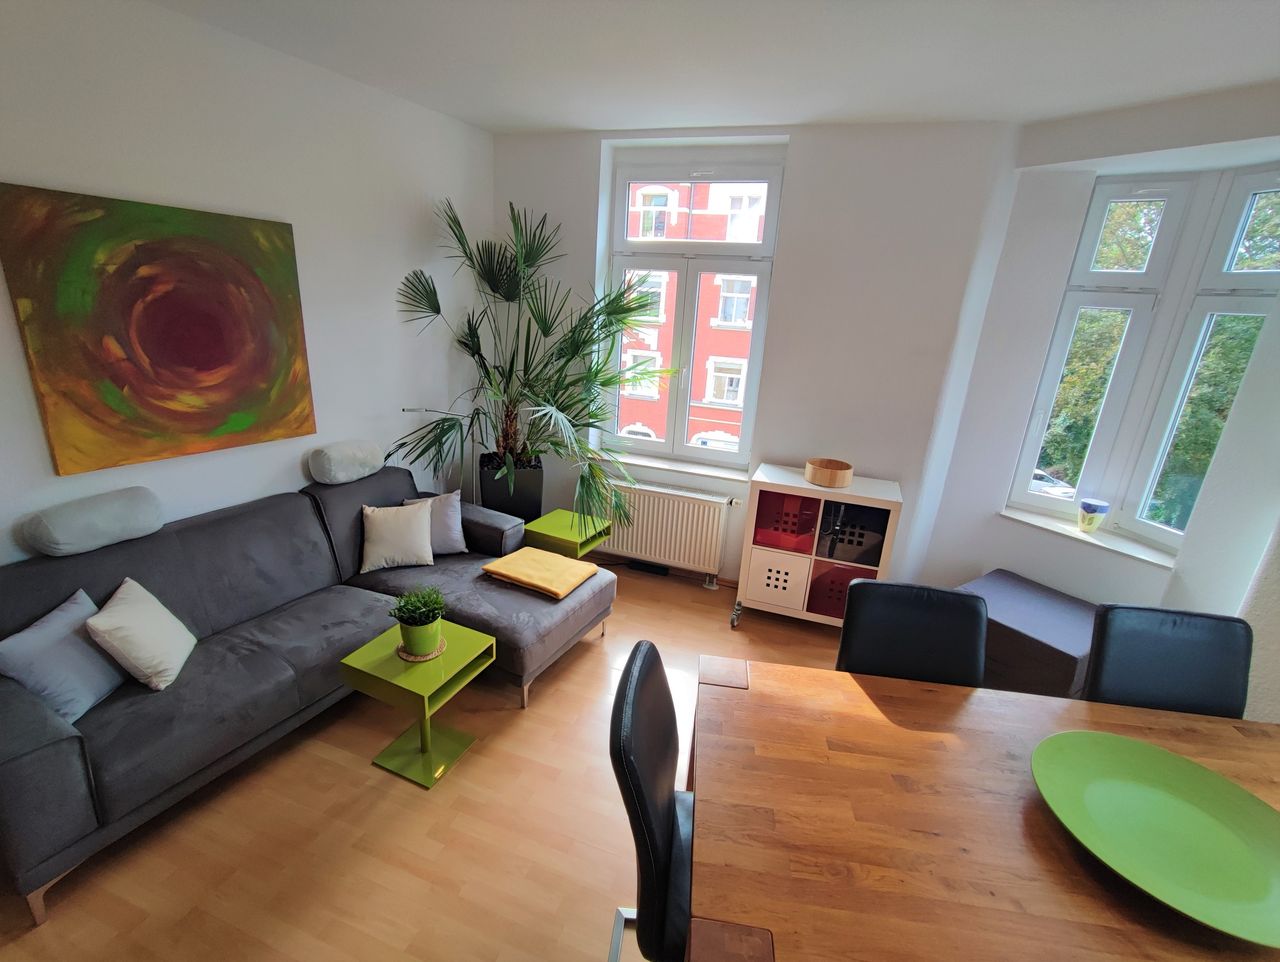 Bright and spacious 3-room apartment on Nettelbeckufer with ideal infrastructure